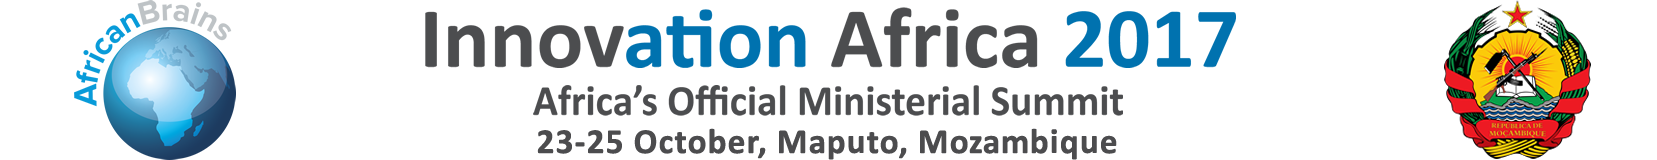 Africa's Official Ministerial Summit - October 2017, Maputo, Mozambique